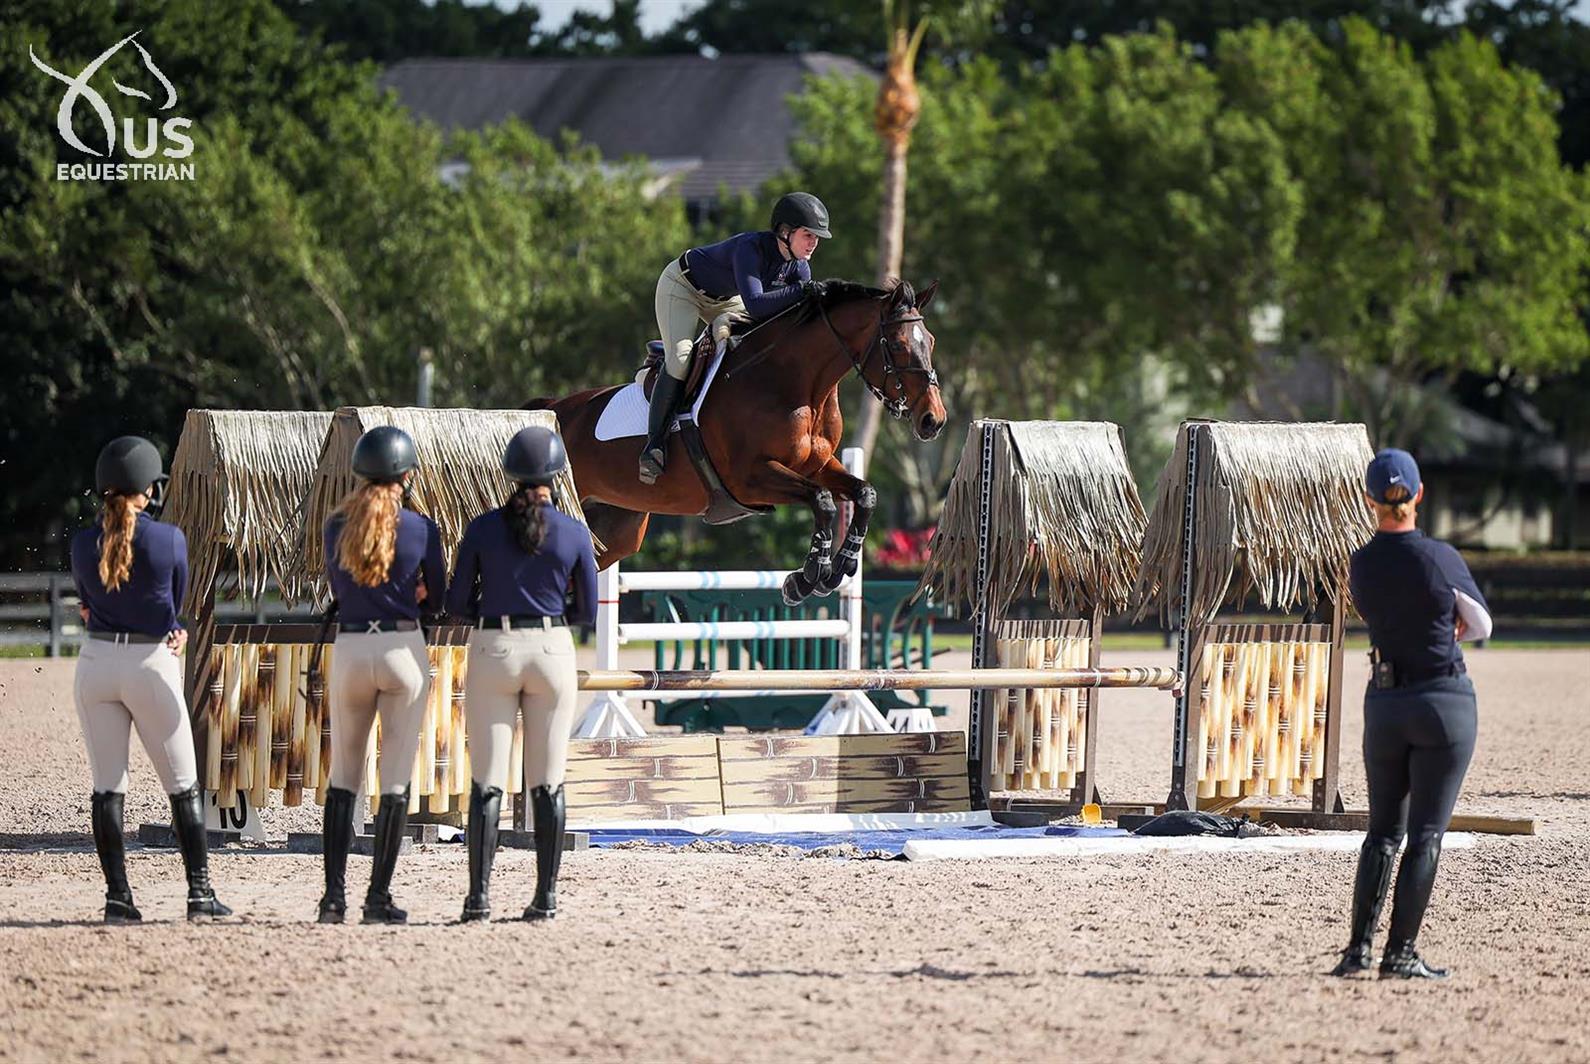 Virginia Bonnie riding under the direction of Lauren Hough at the 2022 USEF Horsemastership Training seession in Wellington, Fla.